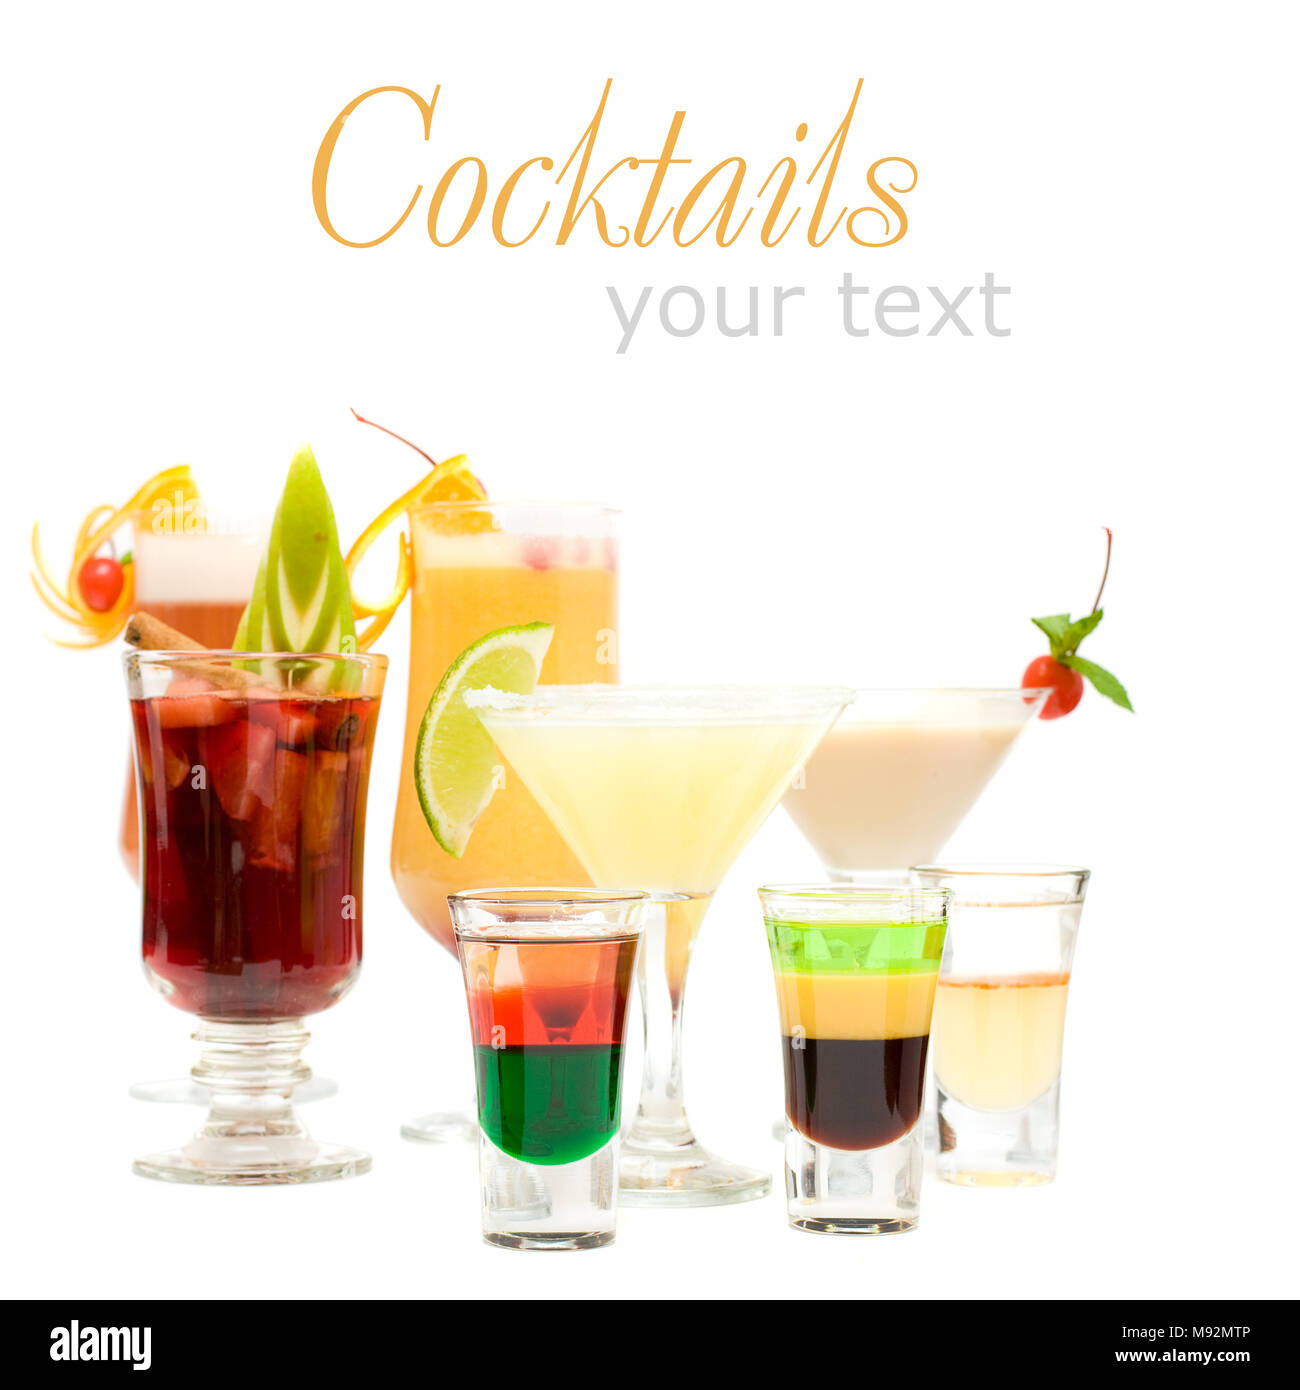 Alcohol Shot Drink on fancy blurred Cocktails Background Stock Photo